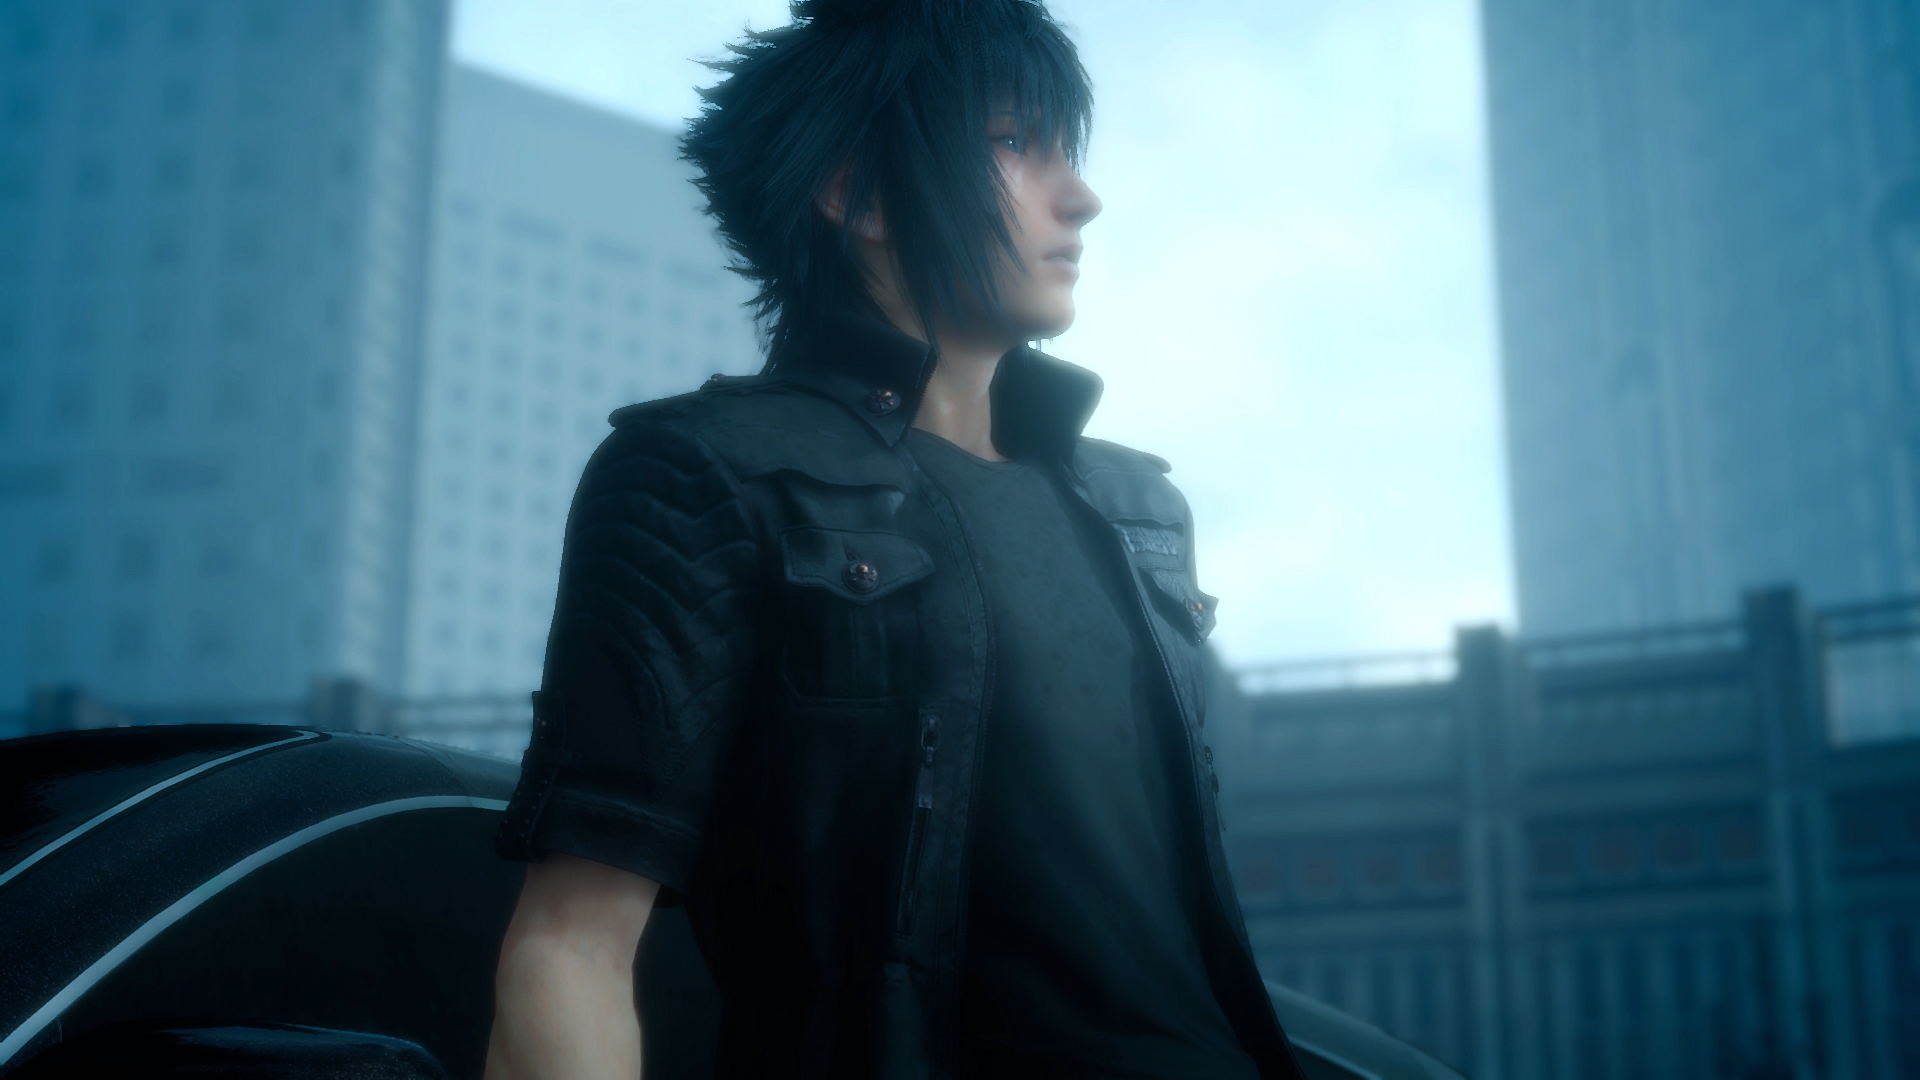 Media asset in full size related to 3dfxzone.it news item entitled as follows: Square Enix pubblica un nuovo gameplay trailer di Final Fantasy XV | Image Name: news23718_Final-Fantasy-XV-Screenshot_1.jpg